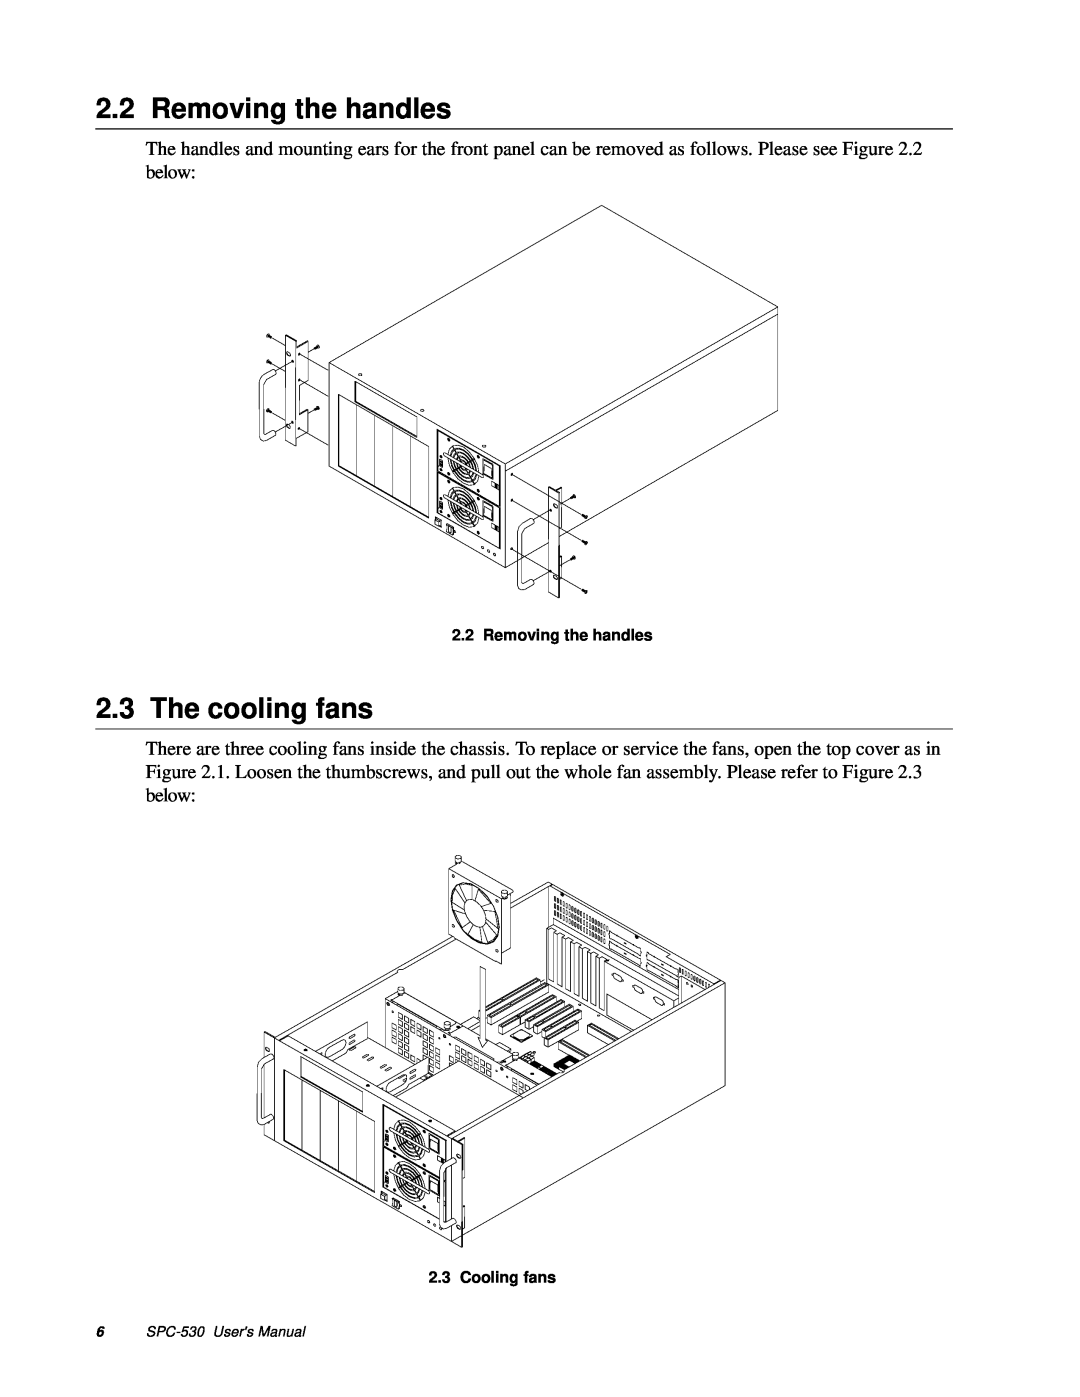 Advantech SPC-530 user manual Removing the handles, The cooling fans, Cooling fans 